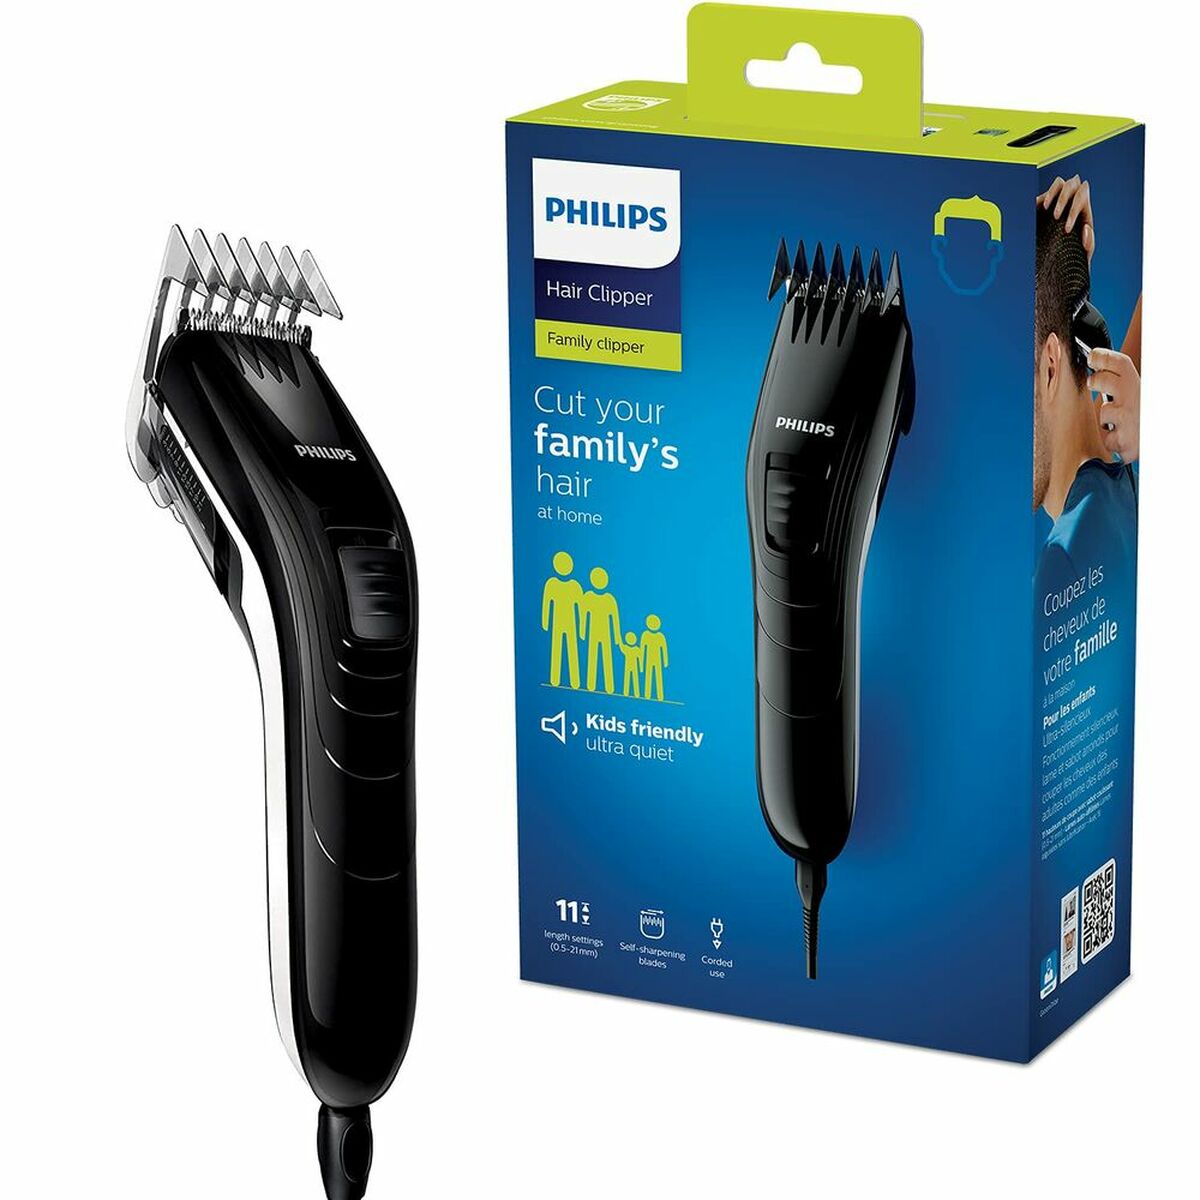 Hair clippers/Shaver Philips QC5115/15